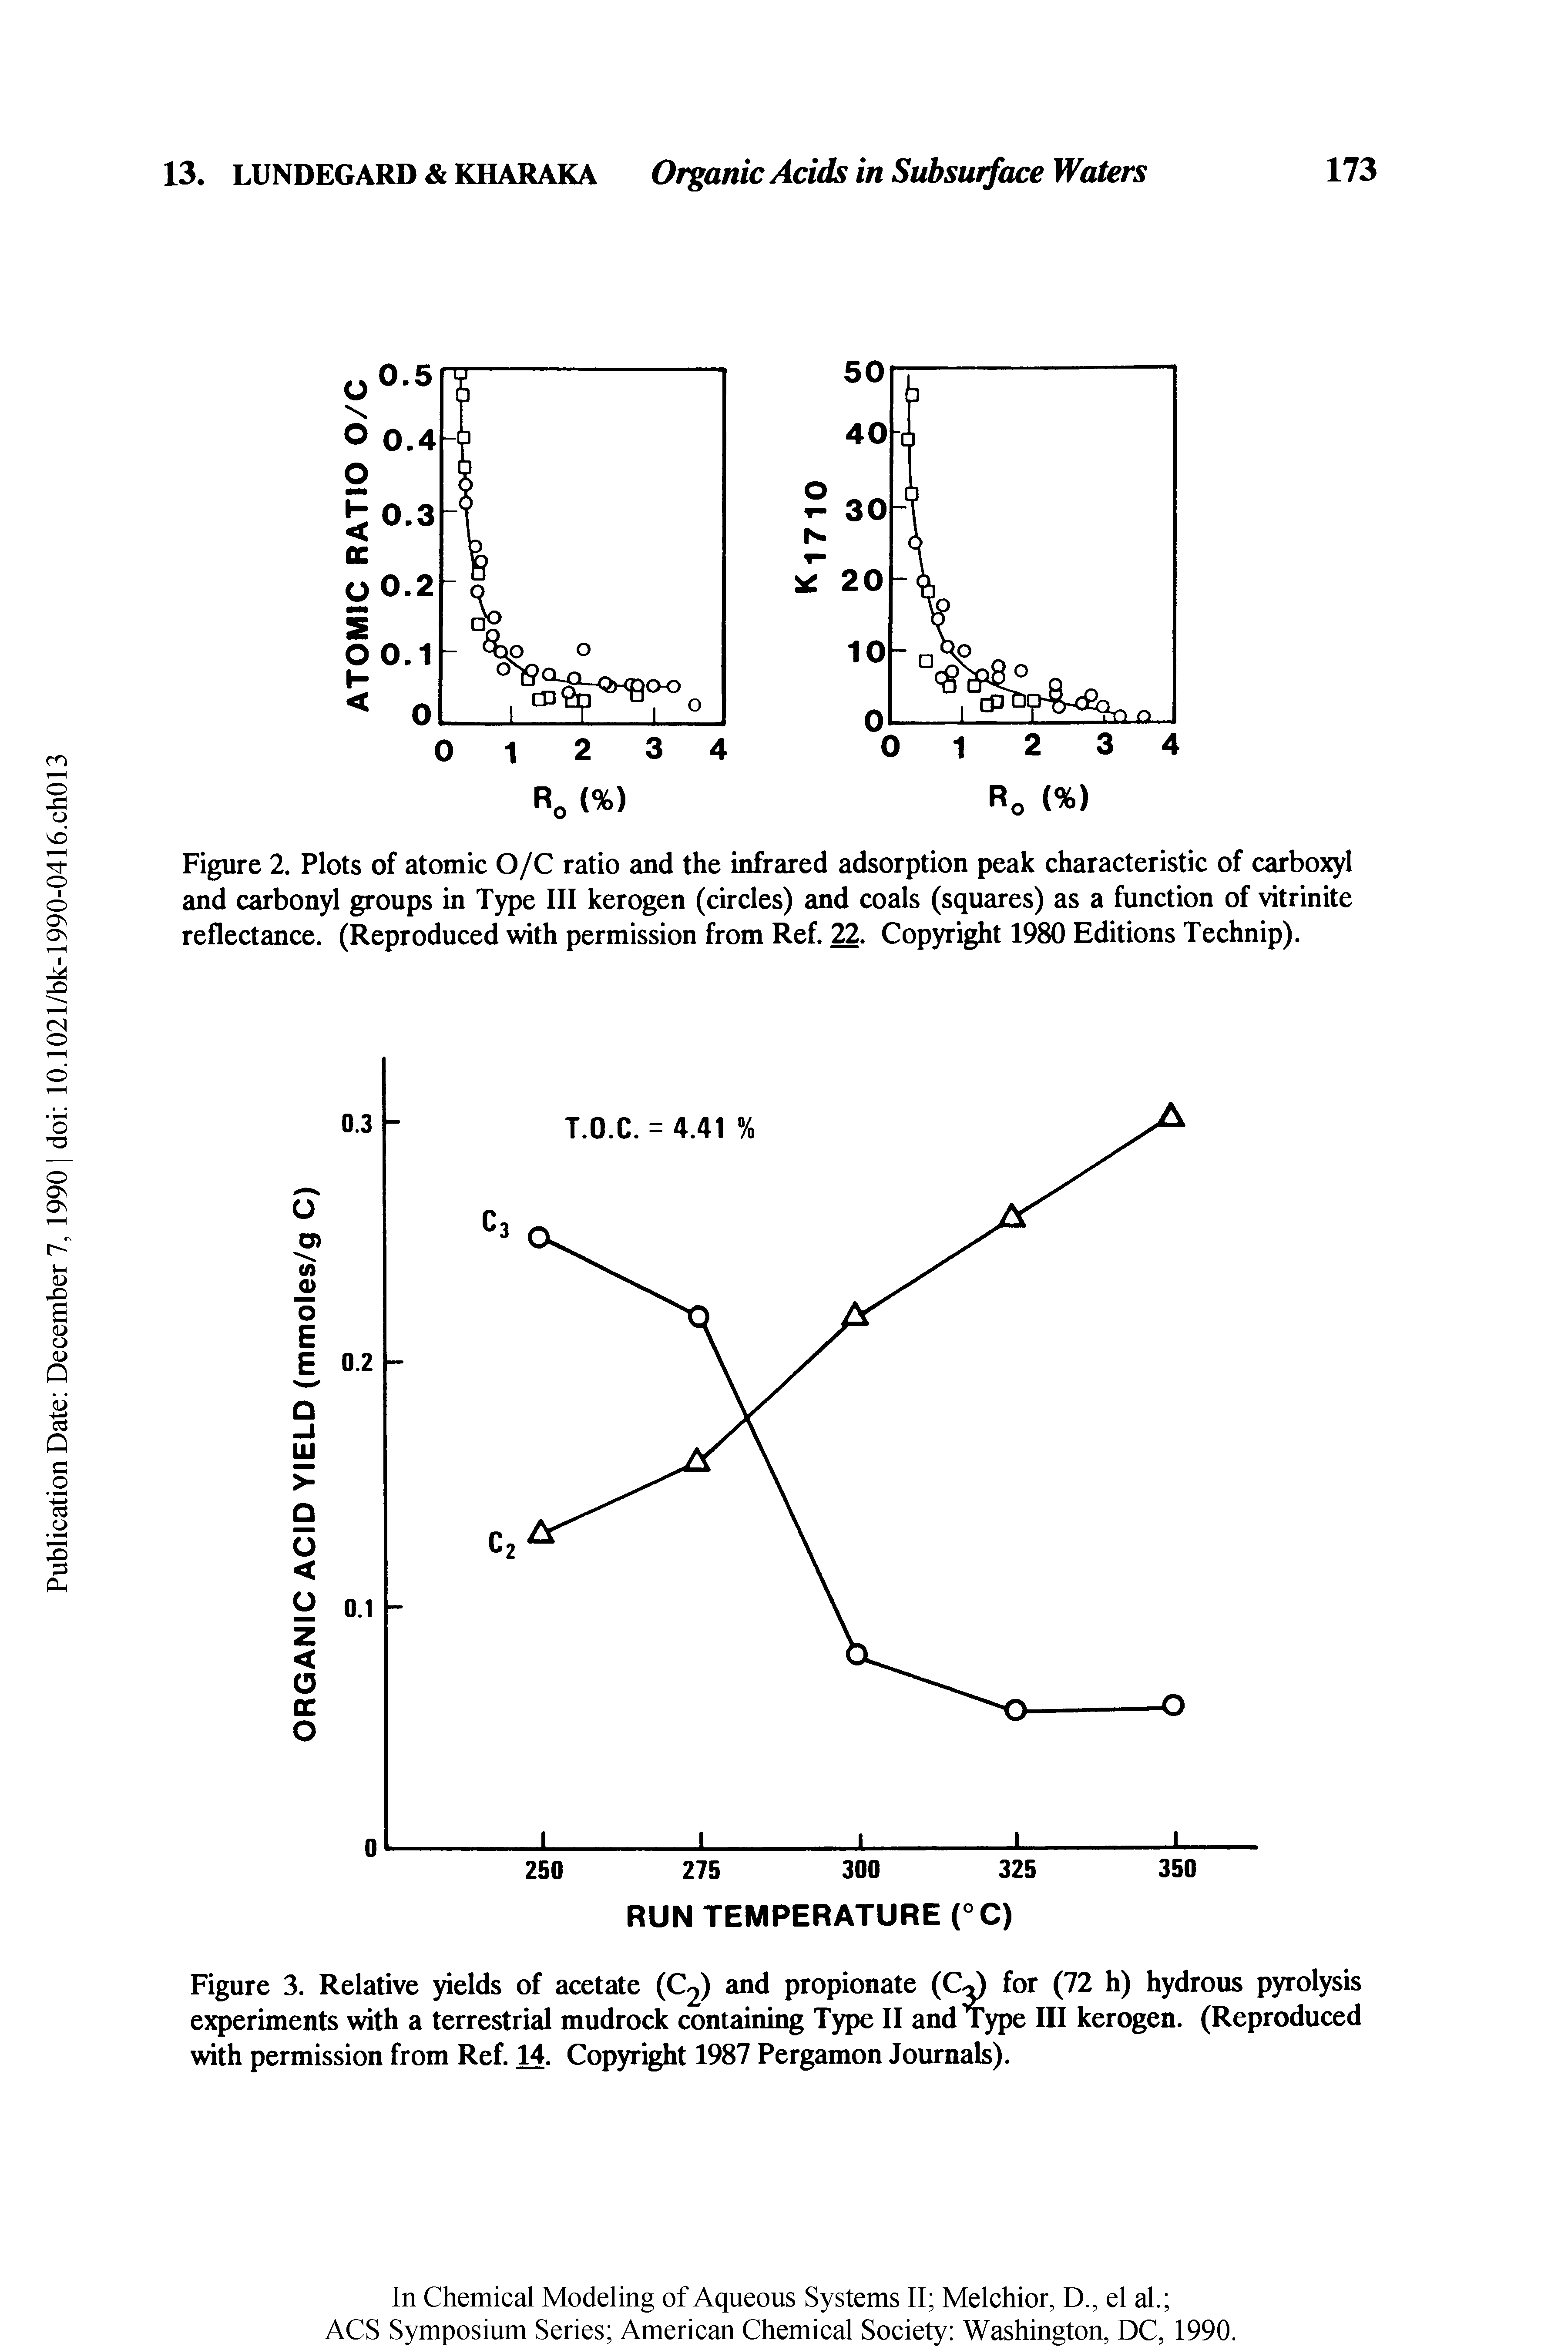 Figure 2. Plots of atomic O/C ratio and the infrared adsorption peak characteristic of carboxyl and carbonyl groups in Type III kerogen (circles) and coals (squares) as a function of vitrinite reflectance. (Reproduced with permission from Ref. 22. Copyright 1980 Editions Technip).